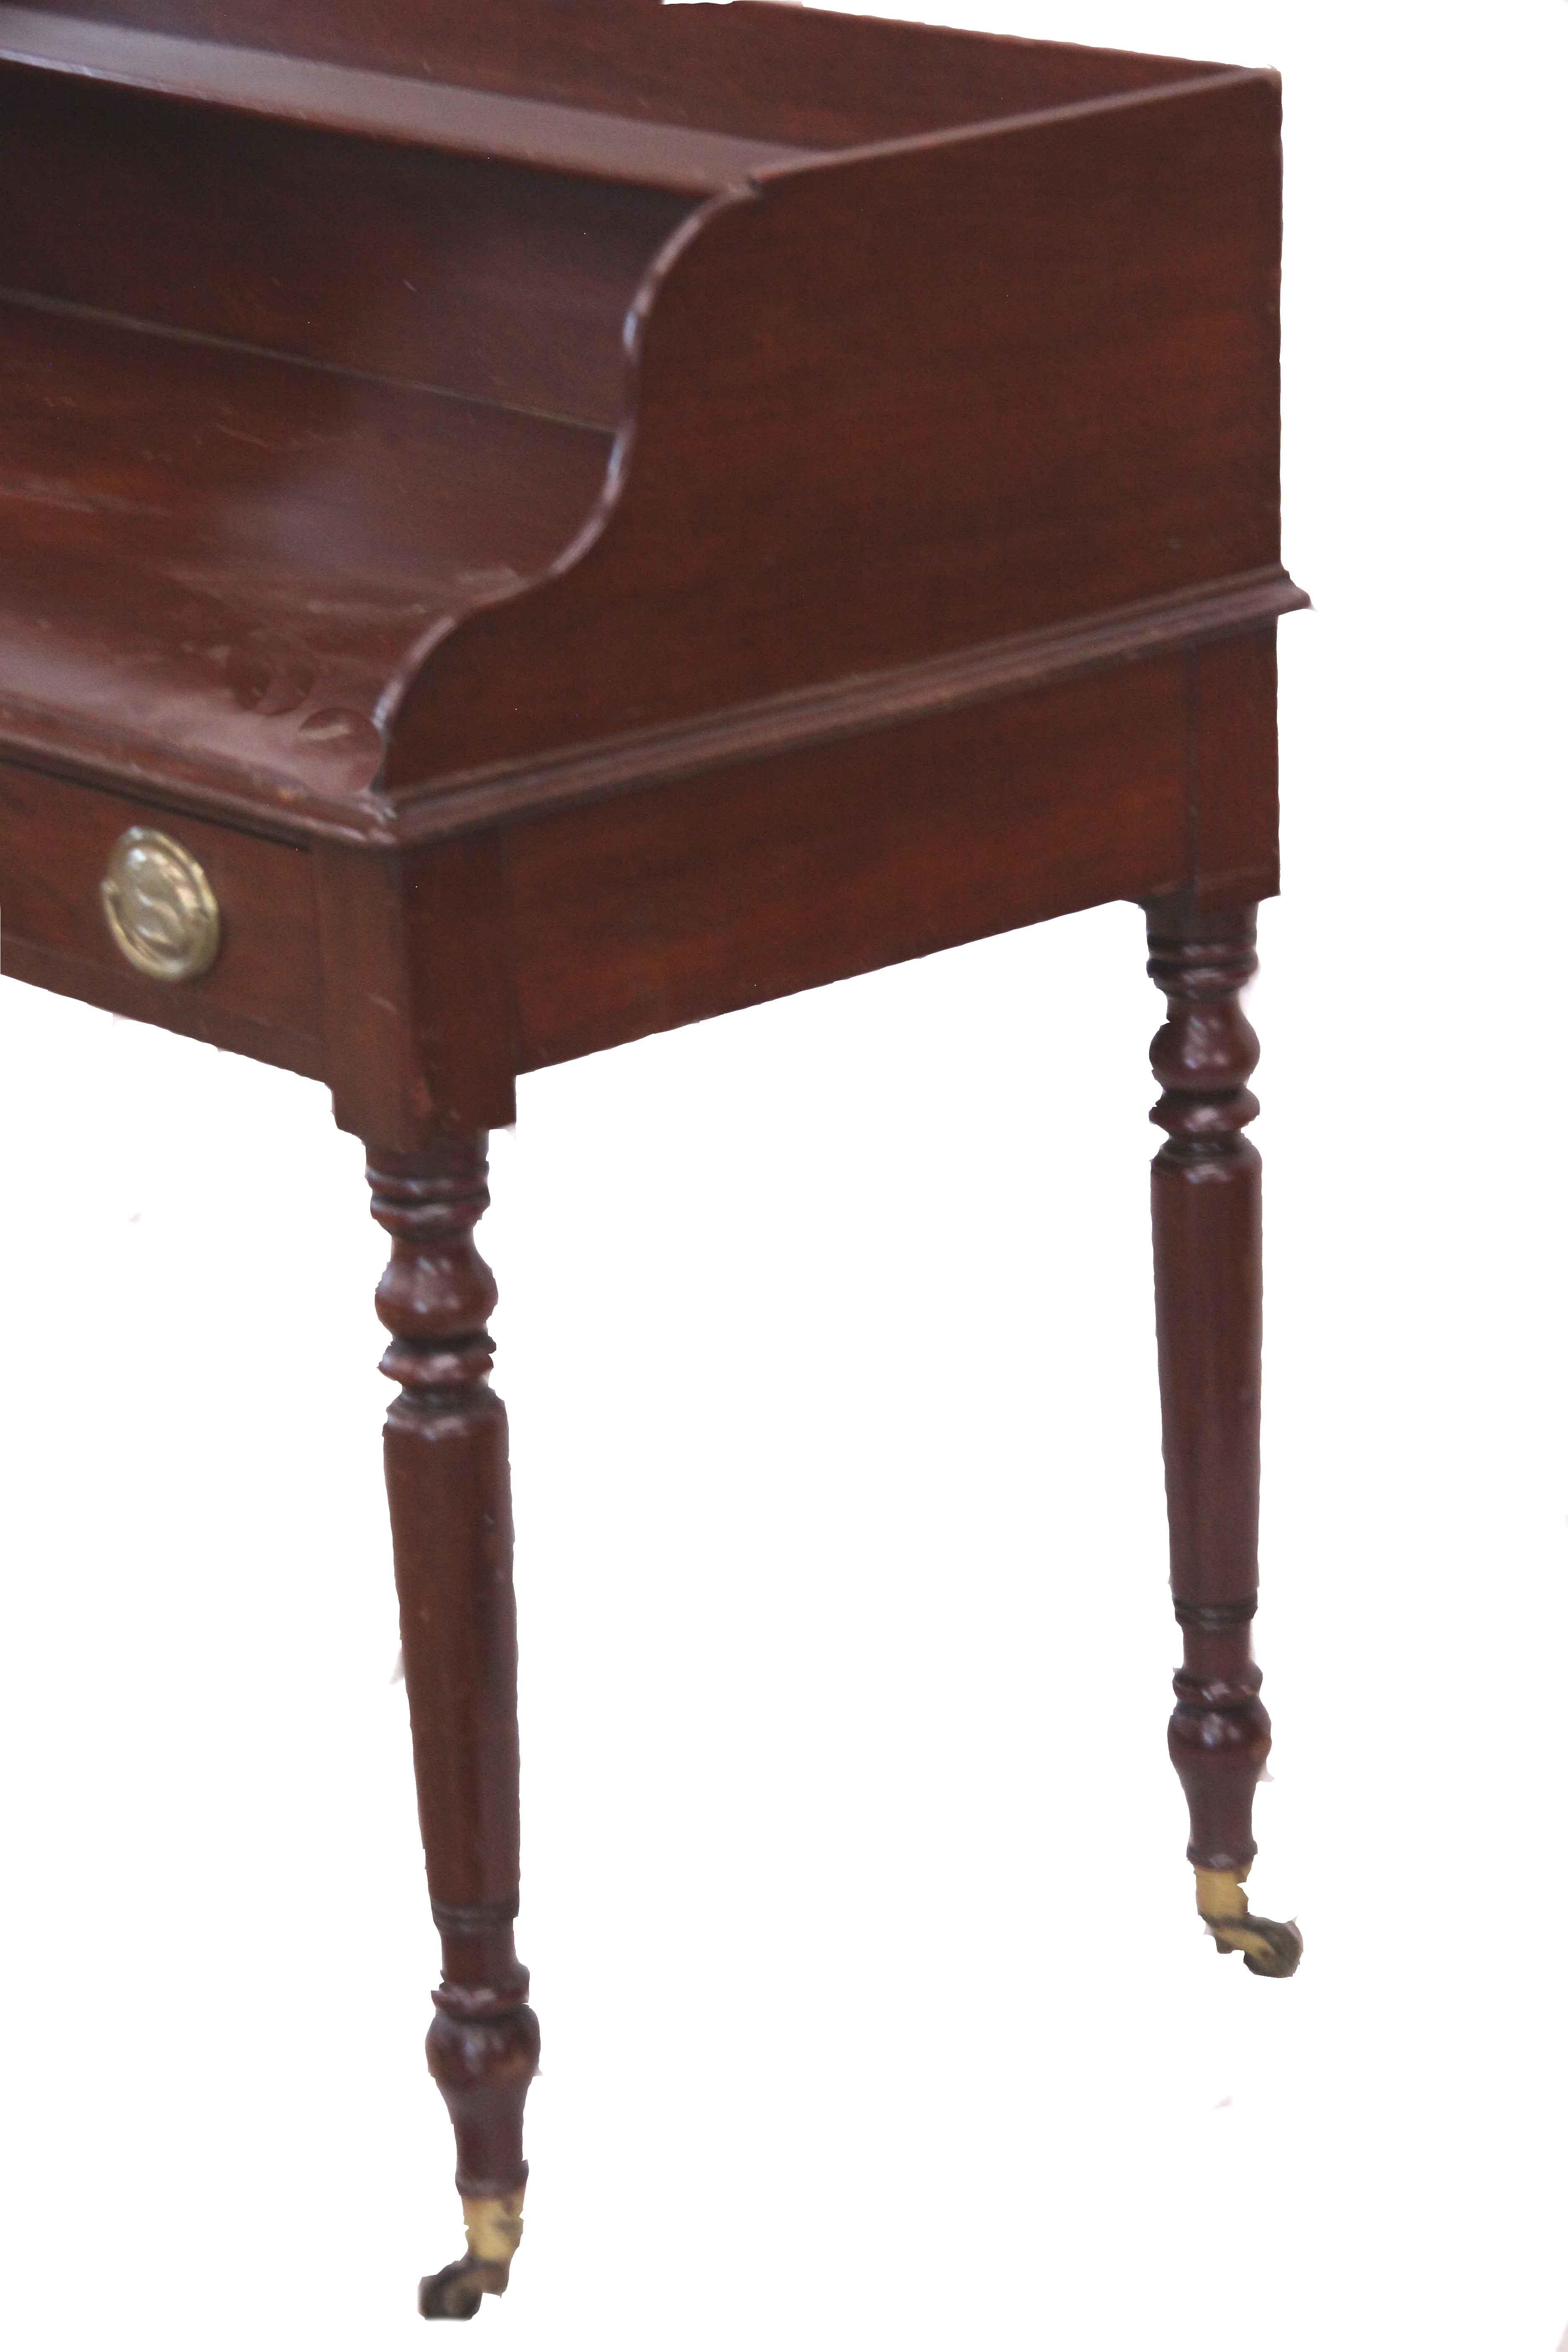 English mahogany two drawer serving table, the top has a gallery surround with a shallow shelf across the back near the crest, two drawers with oval brass pulls, the nicely turned legs with original brass cup castors.  Original finish and patina.